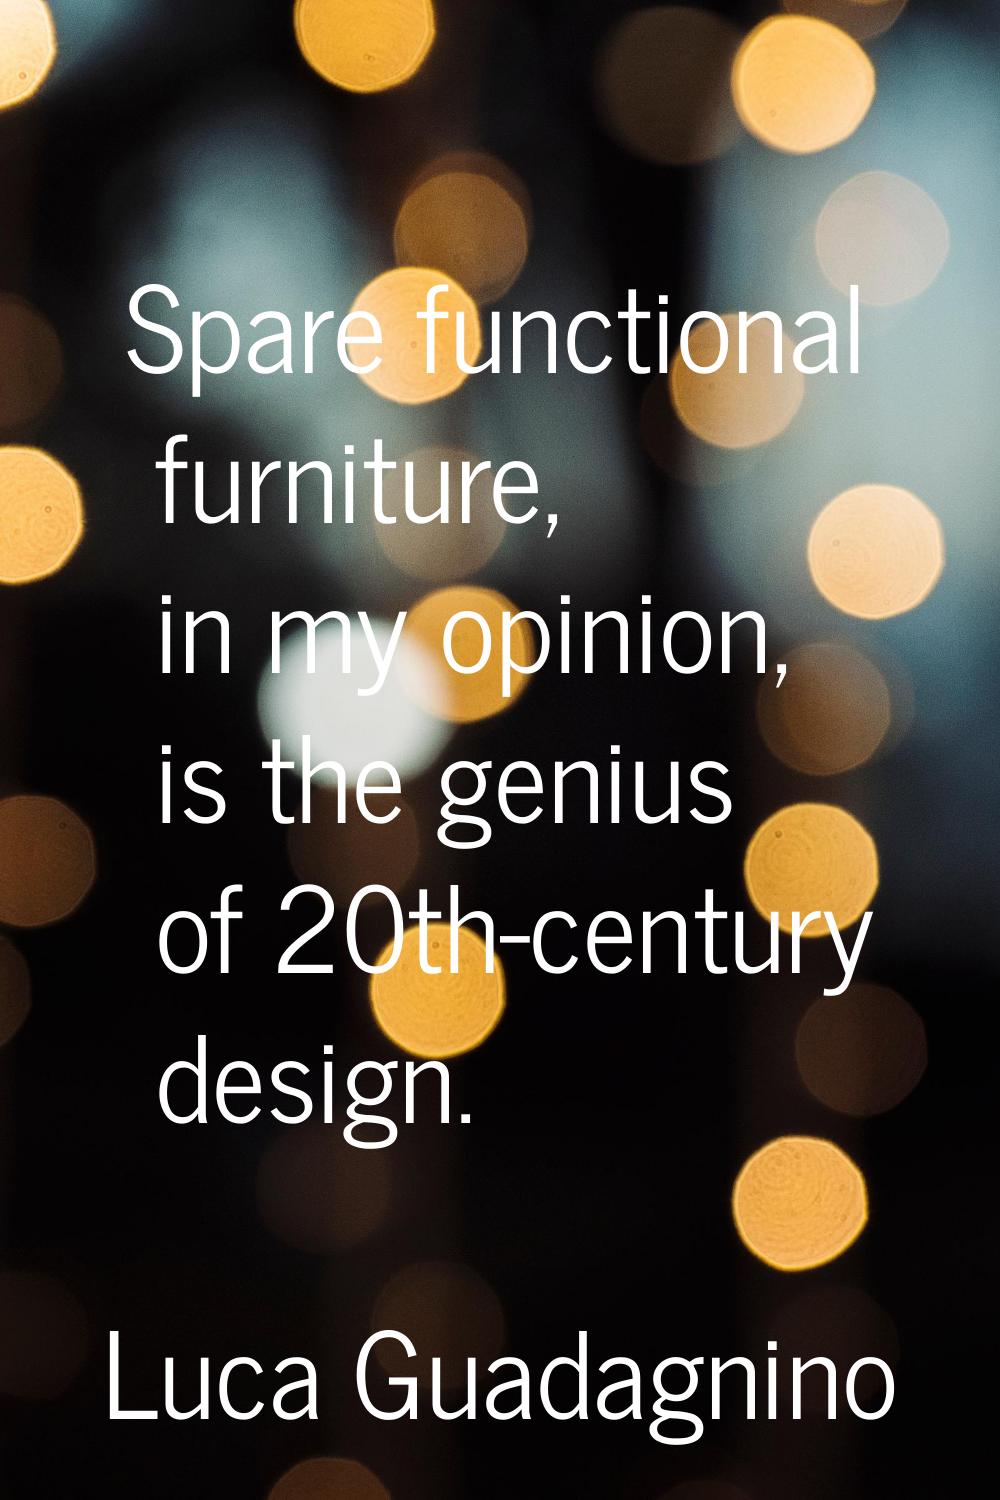 Spare functional furniture, in my opinion, is the genius of 20th-century design.